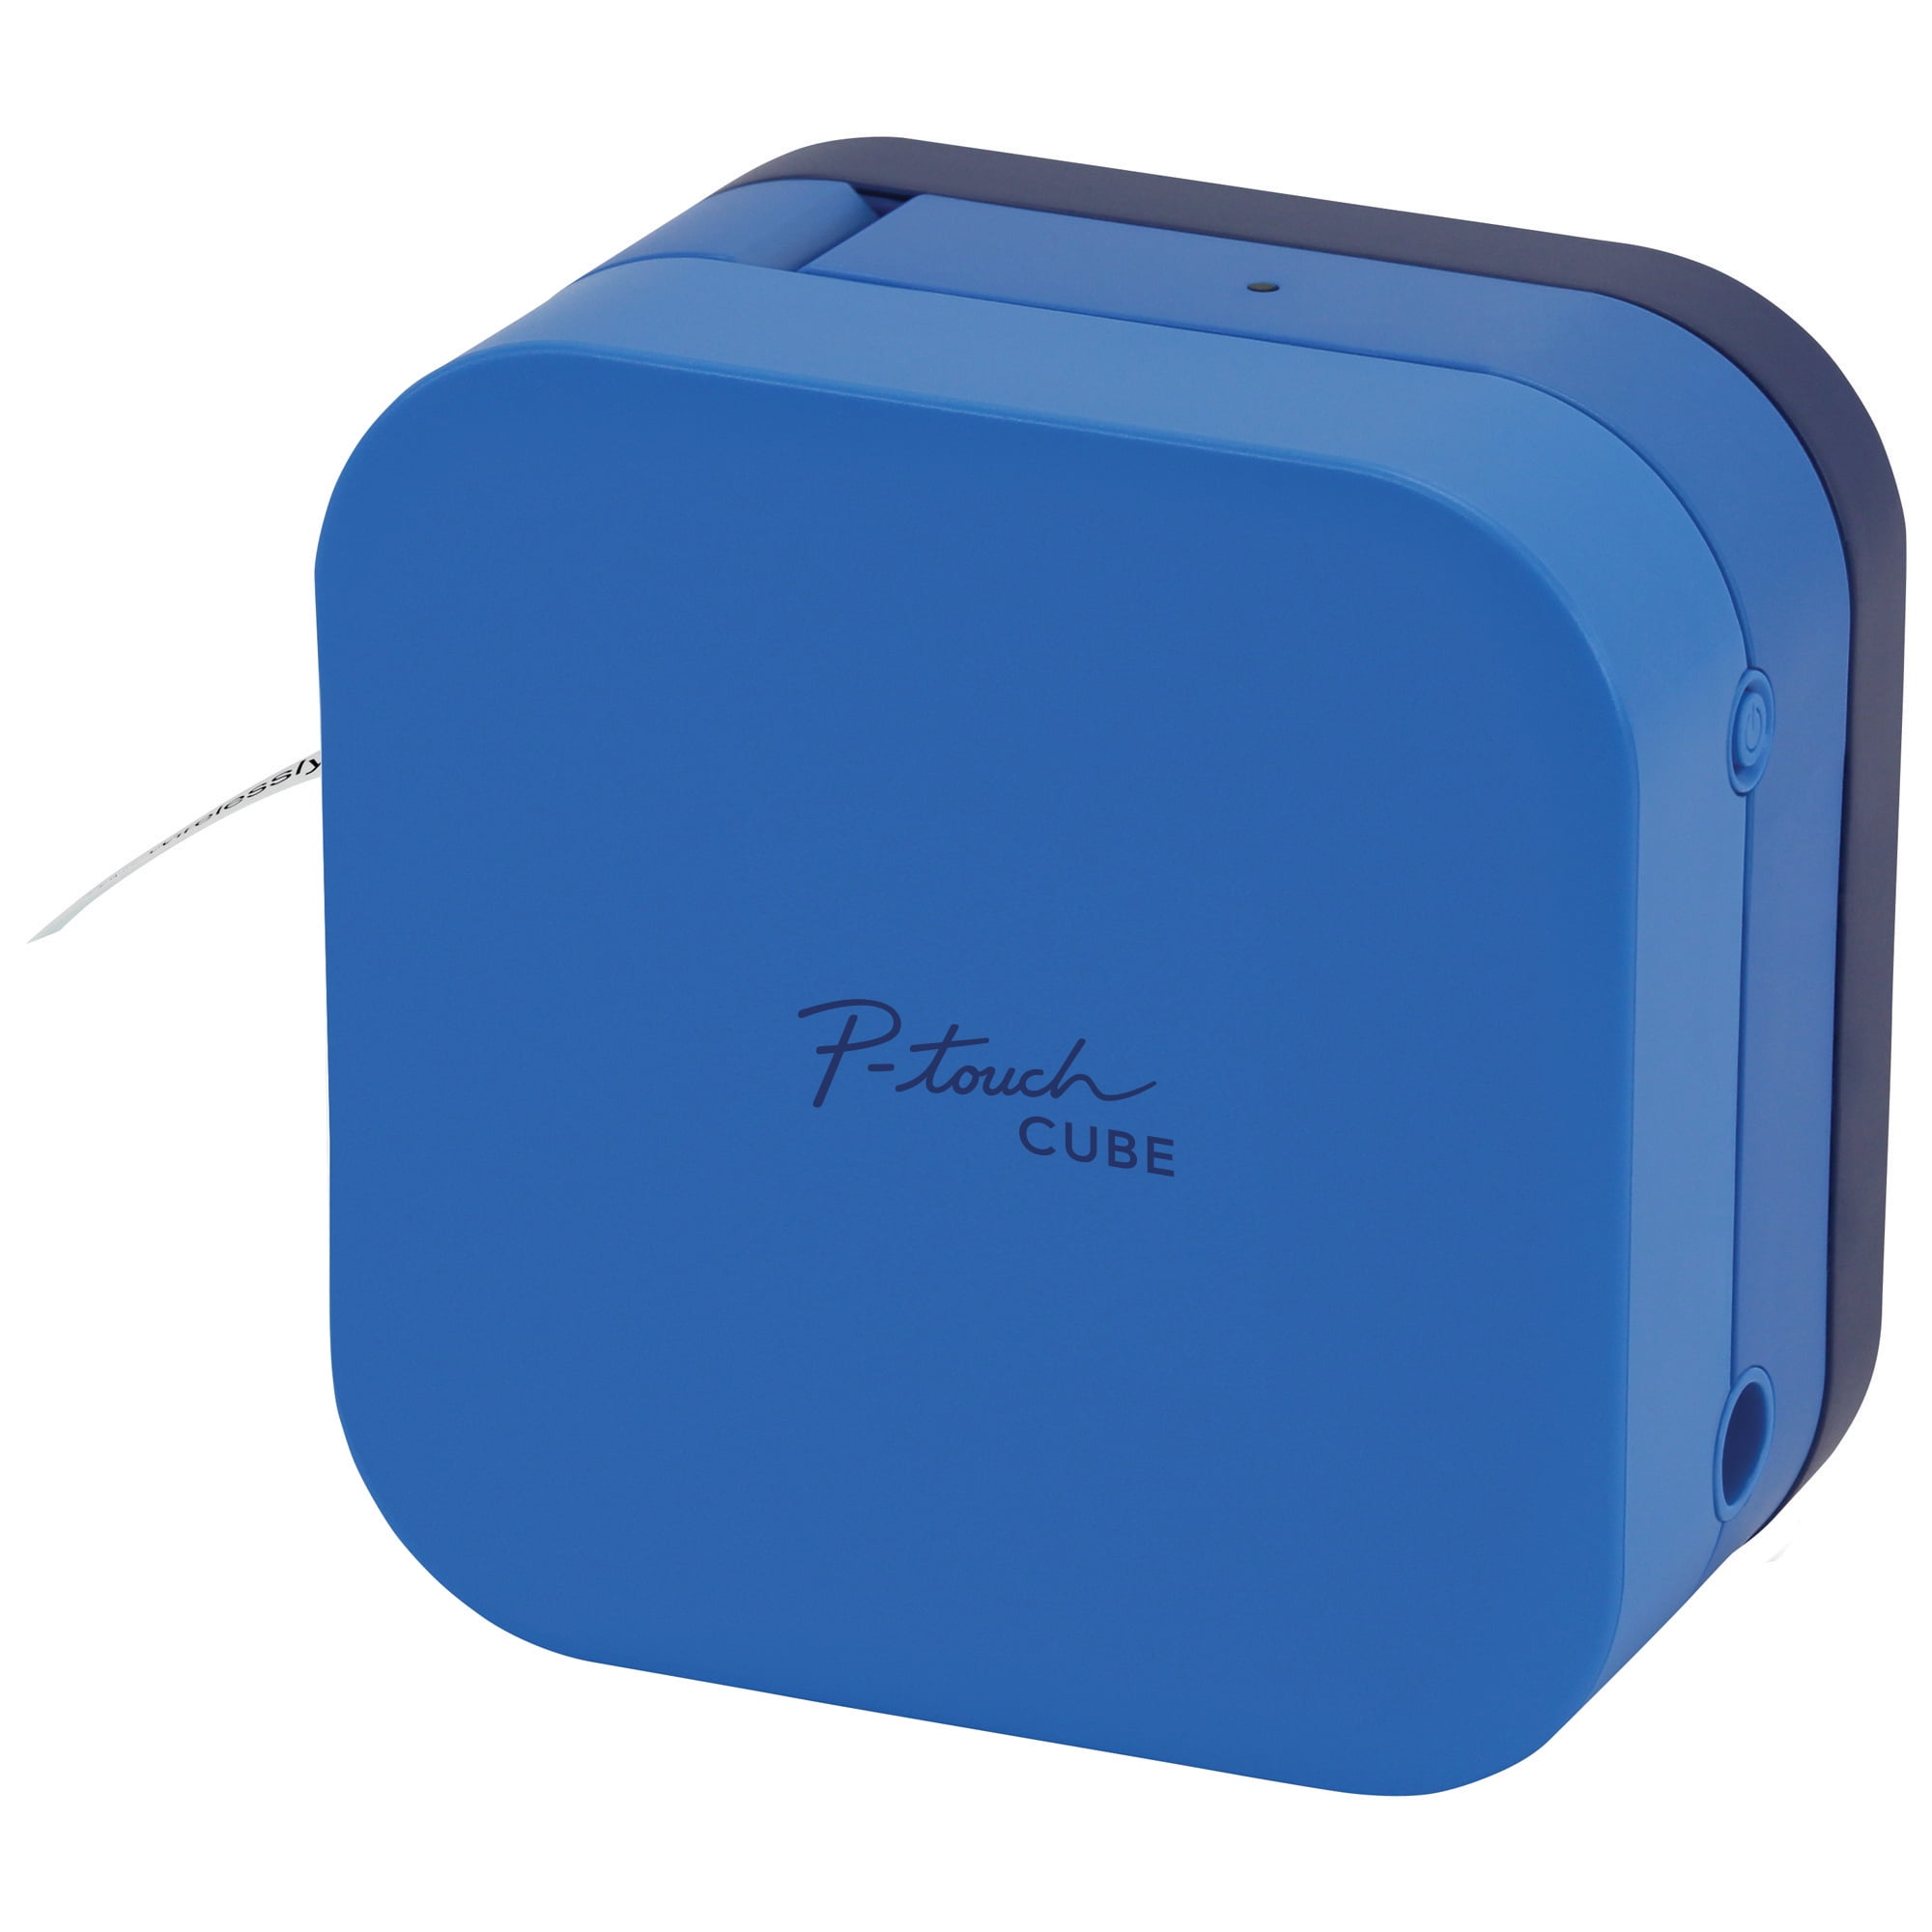 Brother P-Touch Cube Bluetooth Label Maker (Blue)